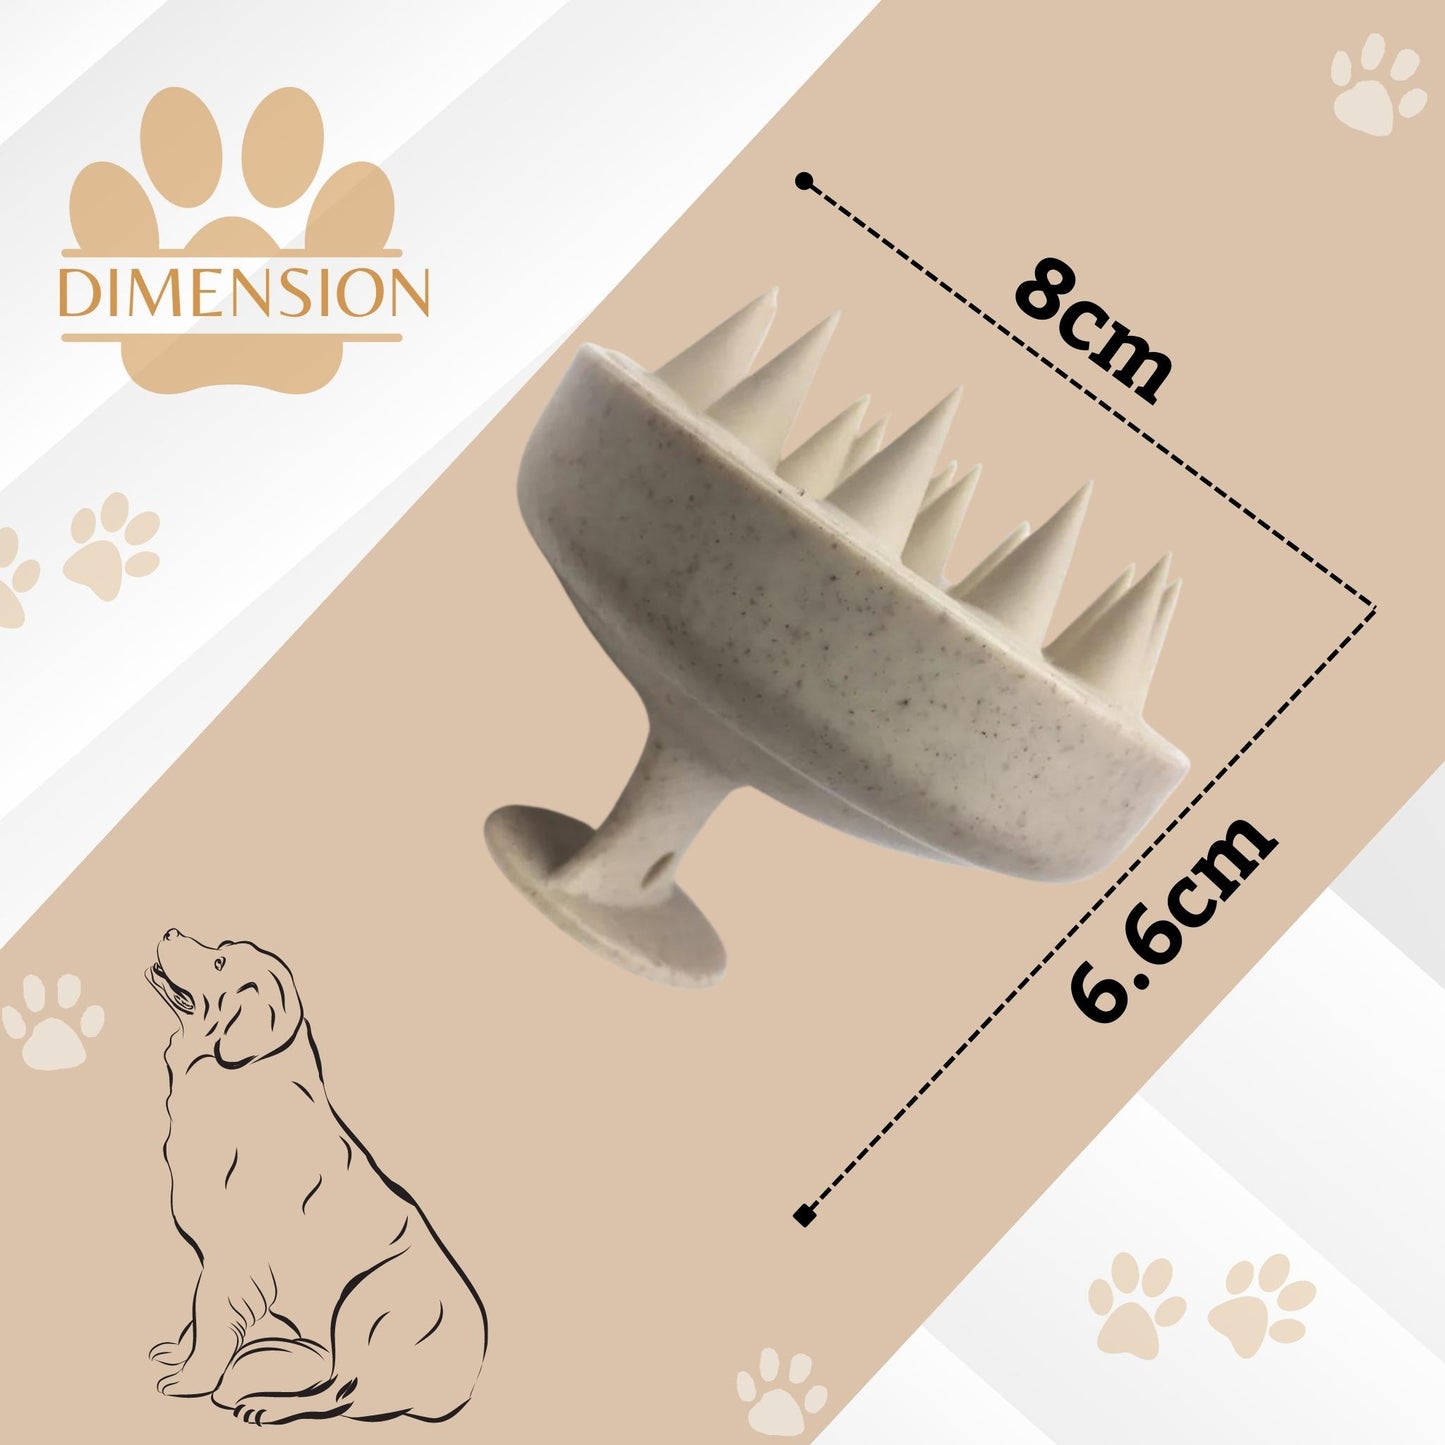 Foodie Puppies 2in1 Bathing & Massaging Silicone Brush for Dogs & Cats